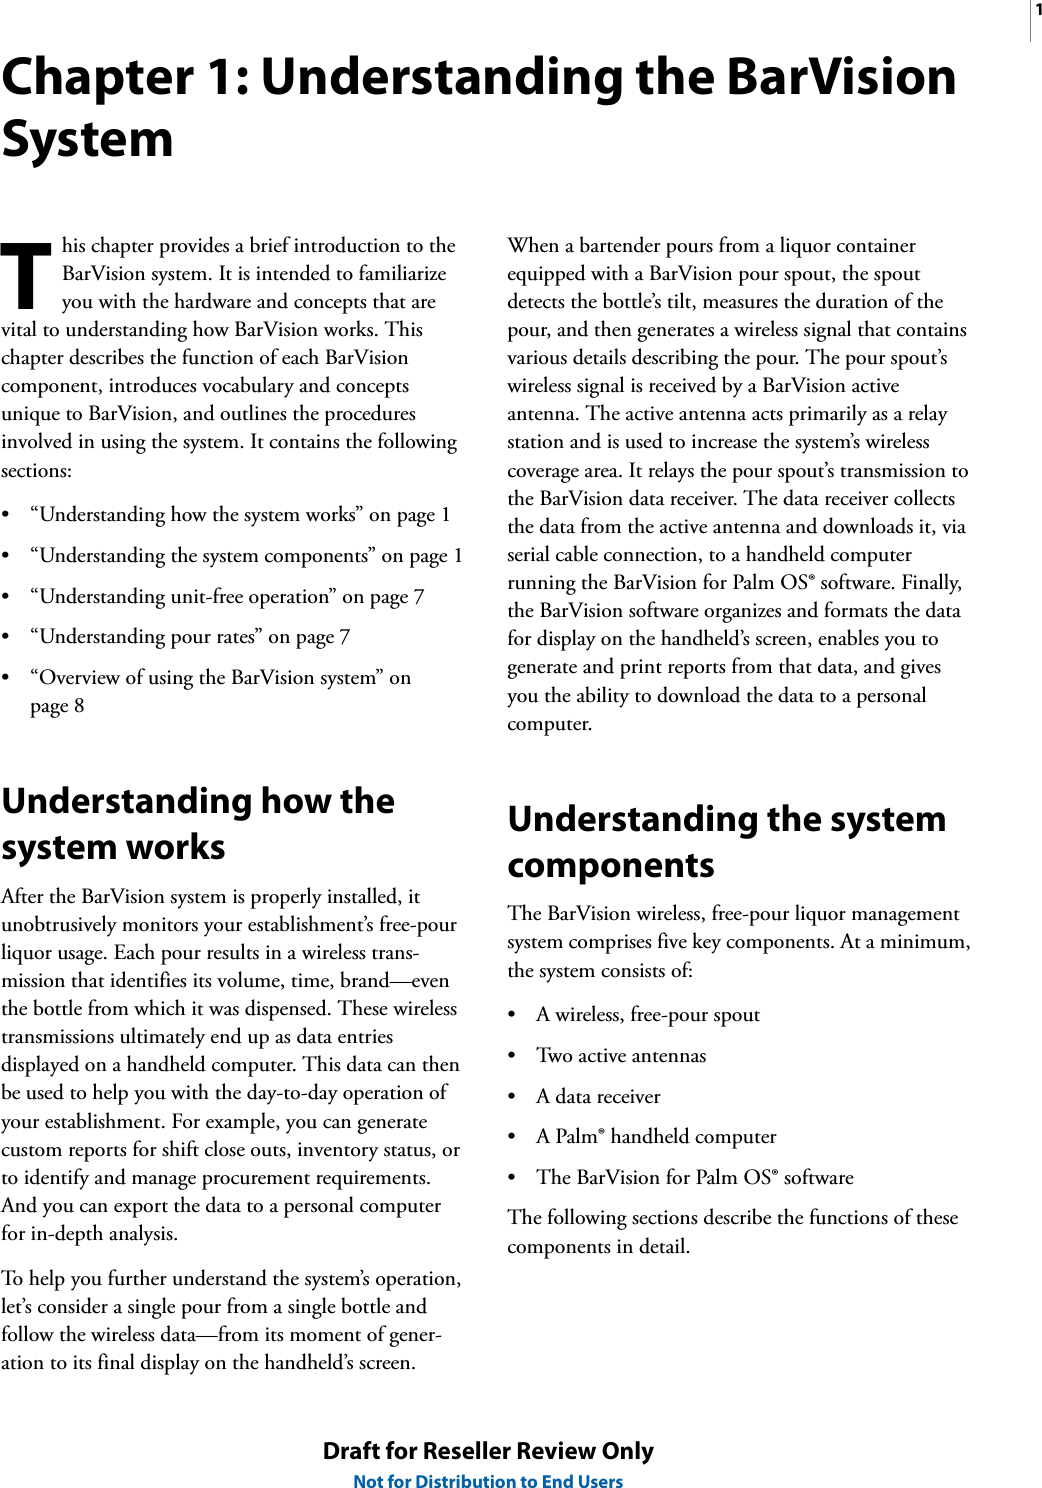 1Draft for Reseller Review OnlyNot for Distribution to End UsersChapter 1: Understanding the BarVision Systemhis chapter provides a brief introduction to the BarVision system. It is intended to familiarize you with the hardware and concepts that are vital to understanding how BarVision works. This chapter describes the function of each BarVision component, introduces vocabulary and concepts unique to BarVision, and outlines the procedures involved in using the system. It contains the following sections:• “Understanding how the system works” on page 1• “Understanding the system components” on page 1• “Understanding unit-free operation” on page 7• “Understanding pour rates” on page 7• “Overview of using the BarVision system” on page 8Understanding how the system worksAfter the BarVision system is properly installed, it unobtrusively monitors your establishment’s free-pour liquor usage. Each pour results in a wireless trans-mission that identifies its volume, time, brand—even the bottle from which it was dispensed. These wireless transmissions ultimately end up as data entries displayed on a handheld computer. This data can then be used to help you with the day-to-day operation of your establishment. For example, you can generate custom reports for shift close outs, inventory status, or to identify and manage procurement requirements. And you can export the data to a personal computer for in-depth analysis.To help you further understand the system’s operation, let’s consider a single pour from a single bottle and follow the wireless data—from its moment of gener-ation to its final display on the handheld’s screen.When a bartender pours from a liquor container equipped with a BarVision pour spout, the spout detects the bottle’s tilt, measures the duration of the pour, and then generates a wireless signal that contains various details describing the pour. The pour spout’s wireless signal is received by a BarVision active antenna. The active antenna acts primarily as a relay station and is used to increase the system’s wireless coverage area. It relays the pour spout’s transmission to the BarVision data receiver. The data receiver collects the data from the active antenna and downloads it, via serial cable connection, to a handheld computer running the BarVision for Palm OS® software. Finally, the BarVision software organizes and formats the data for display on the handheld’s screen, enables you to generate and print reports from that data, and gives you the ability to download the data to a personal computer.Understanding the system componentsThe BarVision wireless, free-pour liquor management system comprises five key components. At a minimum, the system consists of:• A wireless, free-pour spout• Two active antennas•A data receiver• A Palm® handheld computer• The BarVision for Palm OS® softwareThe following sections describe the functions of these components in detail.T